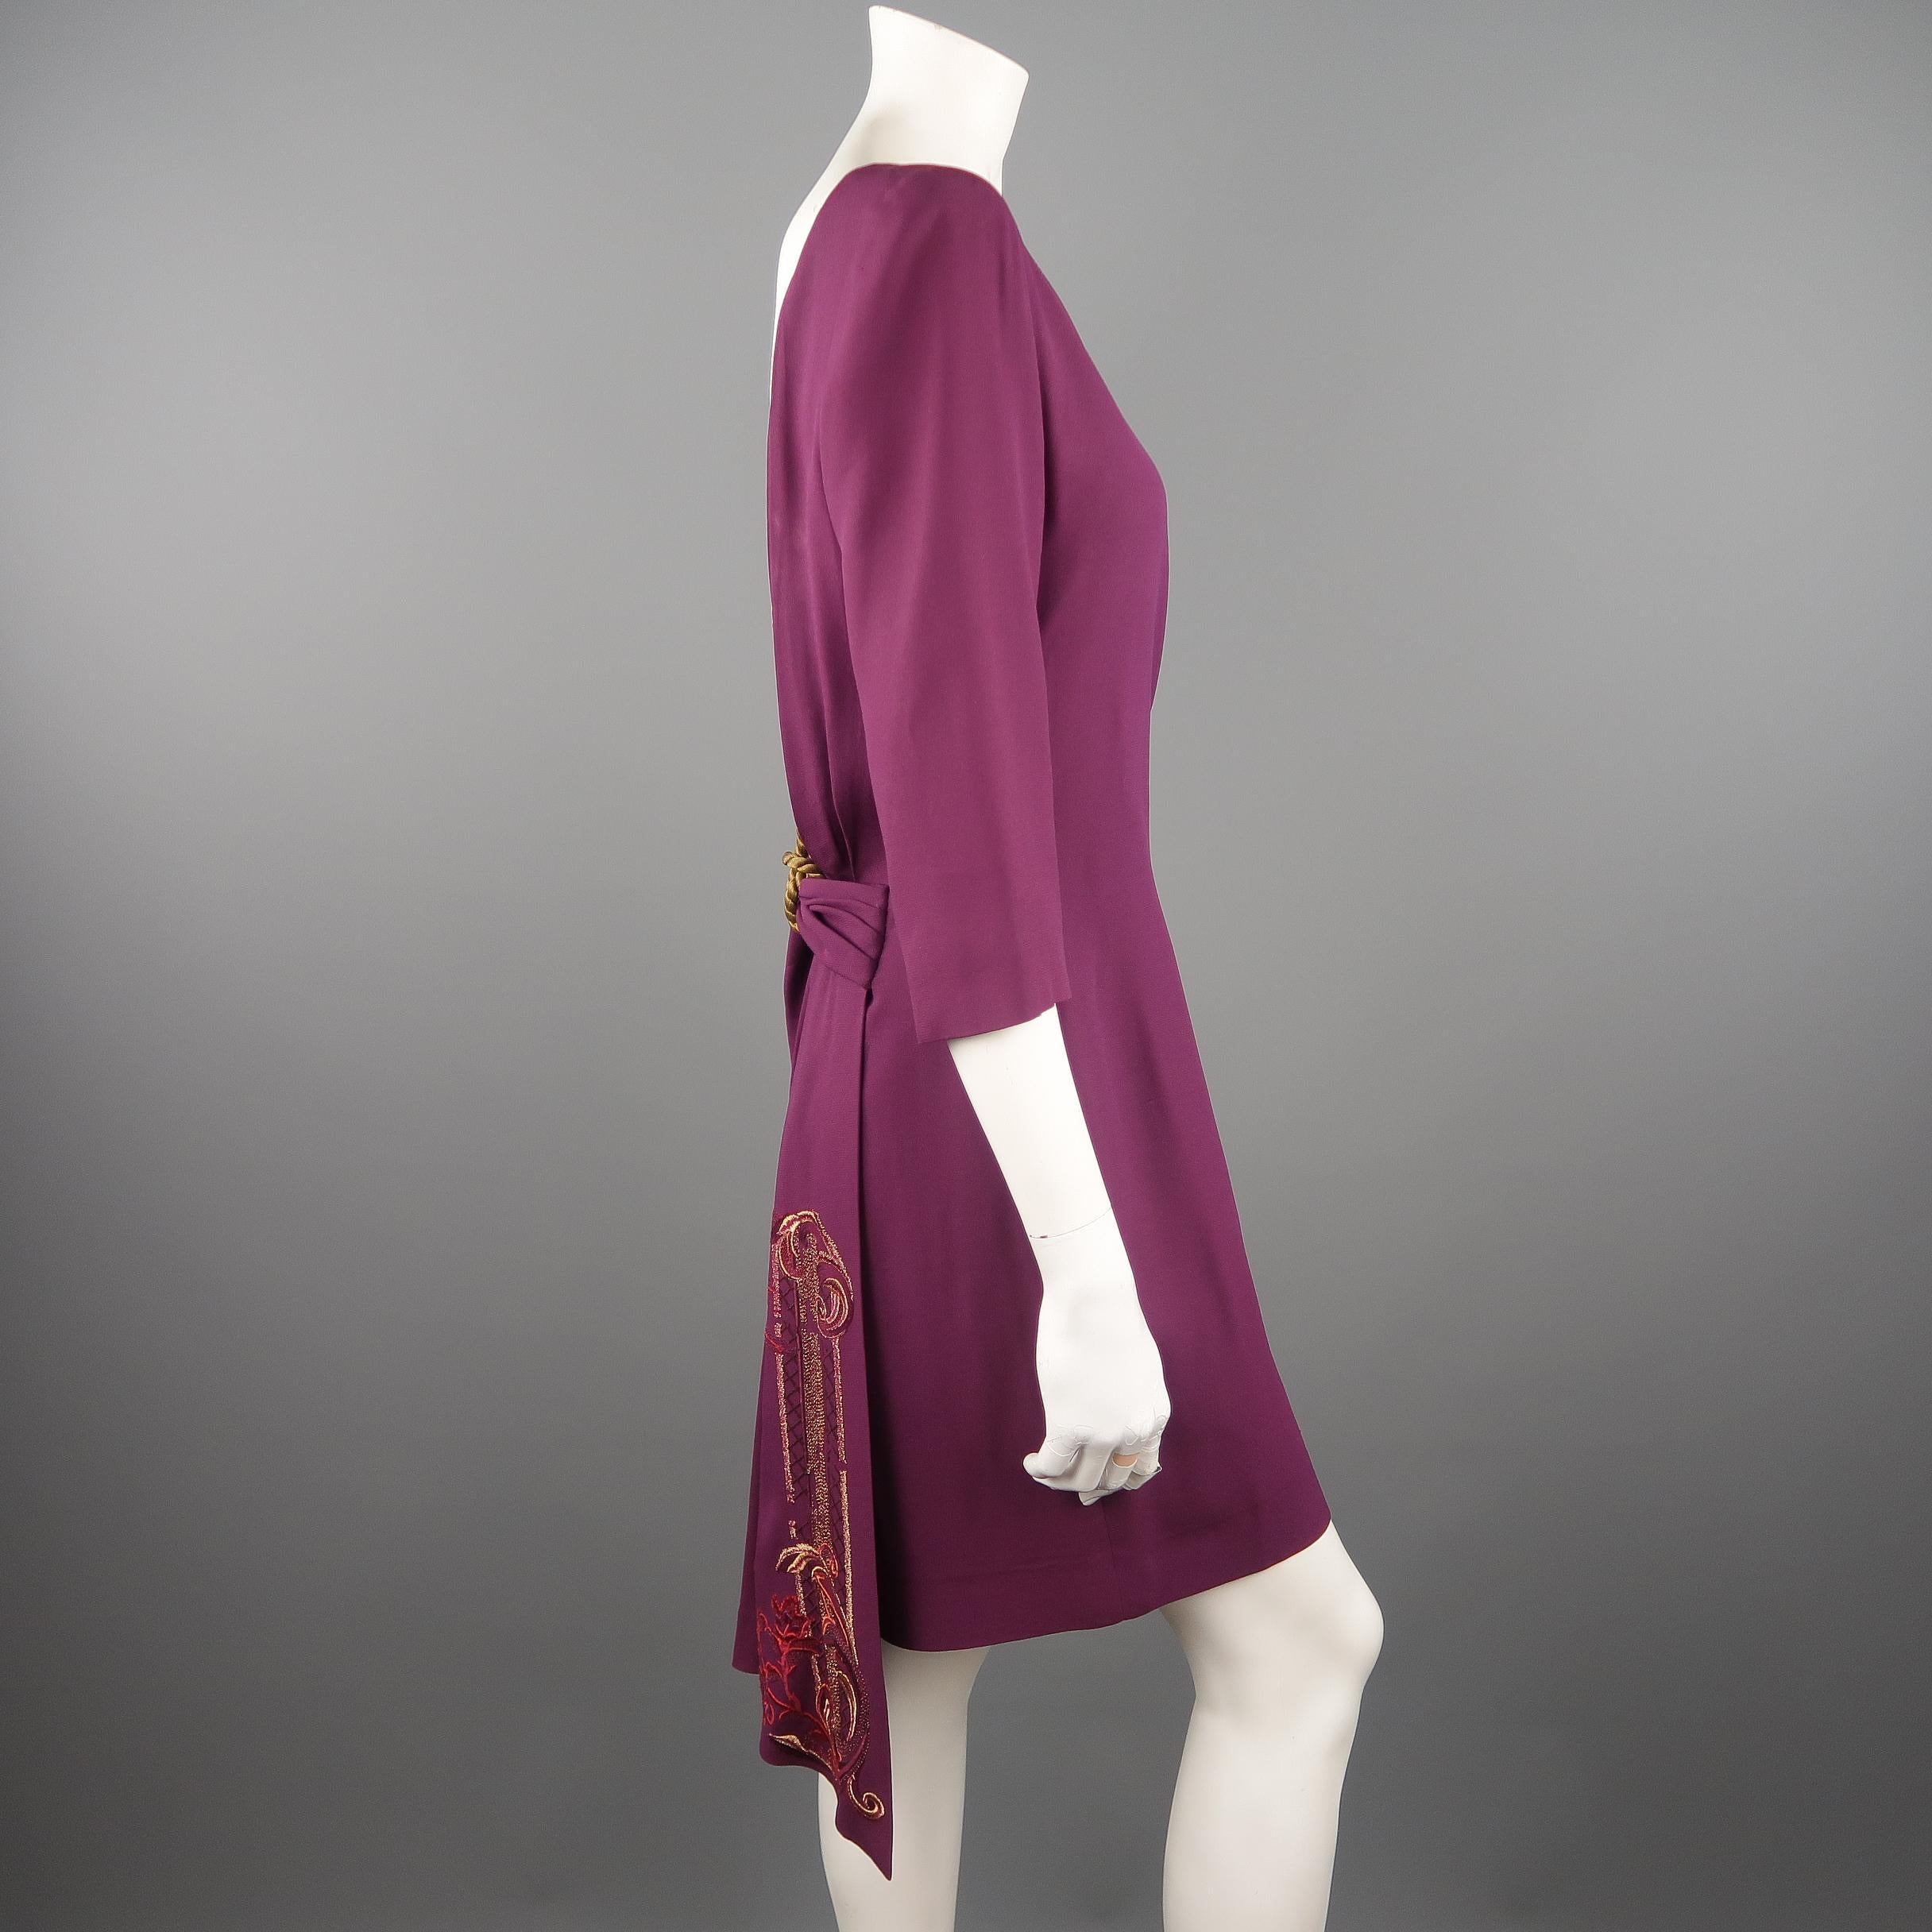 Vintage CHRISTIAN DIOR dress comes in orchid purple crepe with a boat neck, three quarter sleeves, open back with gold rope accent, and pleated draped details with embroidered sash. Minor wear throughout. As-is. Made in France.
 
Good Pre-Owned